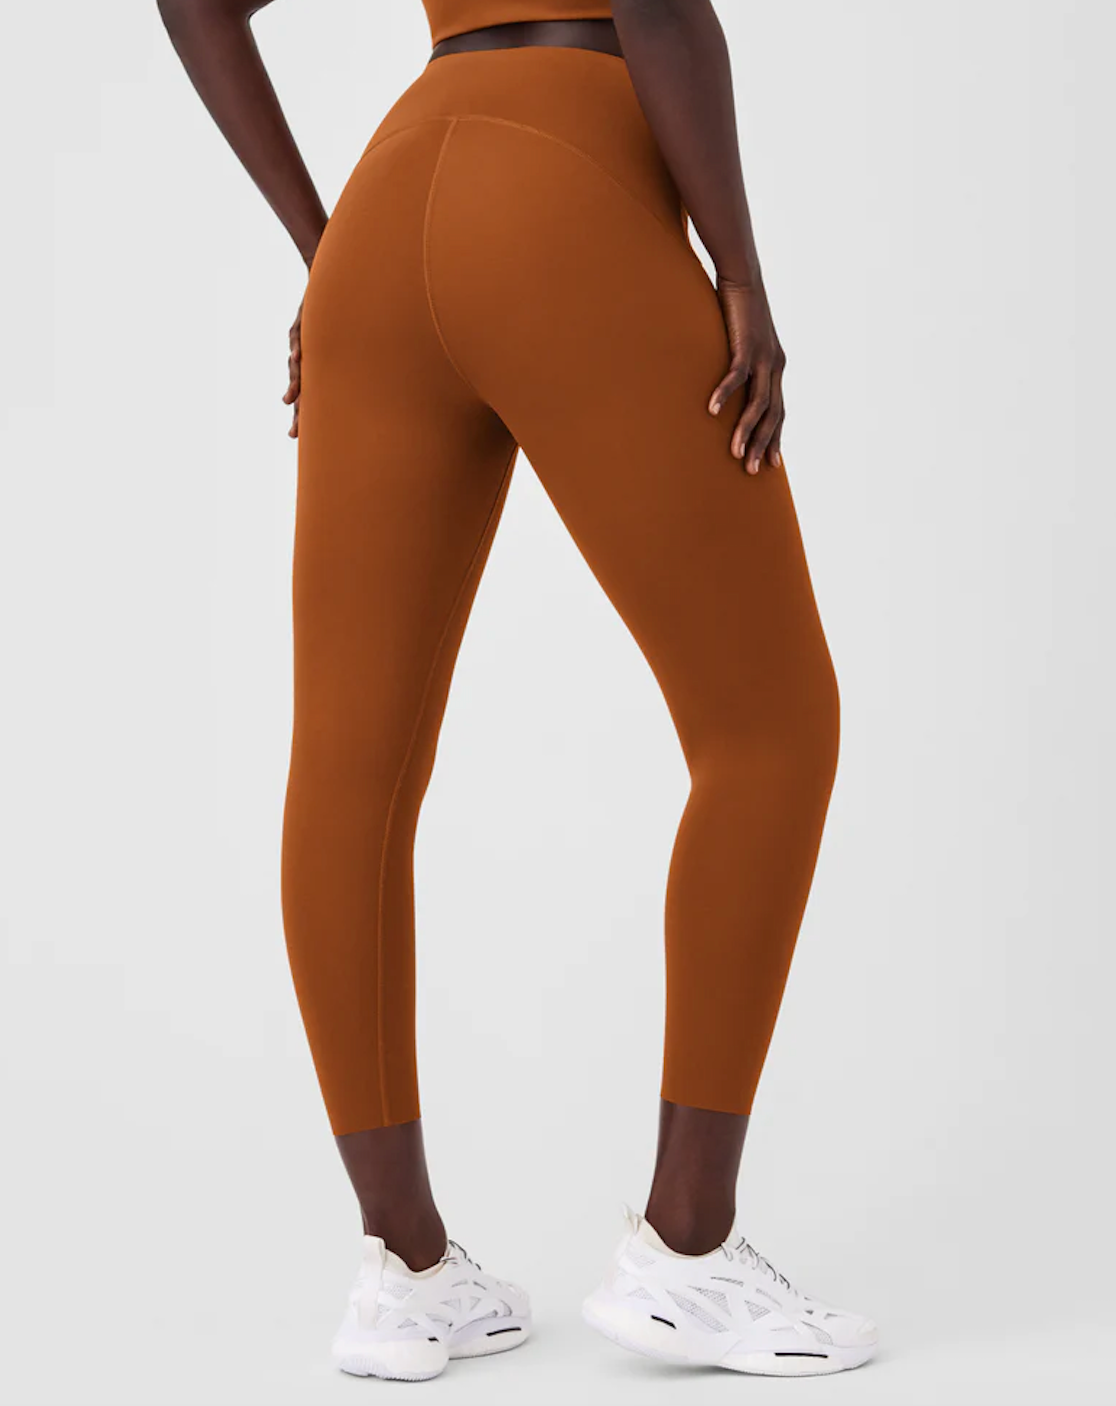 Meet our NEW fall colorway: Butterscotch. Offered in a variety of your  favorite SPANX activewear and AirEssentials styles, Butterscotch i